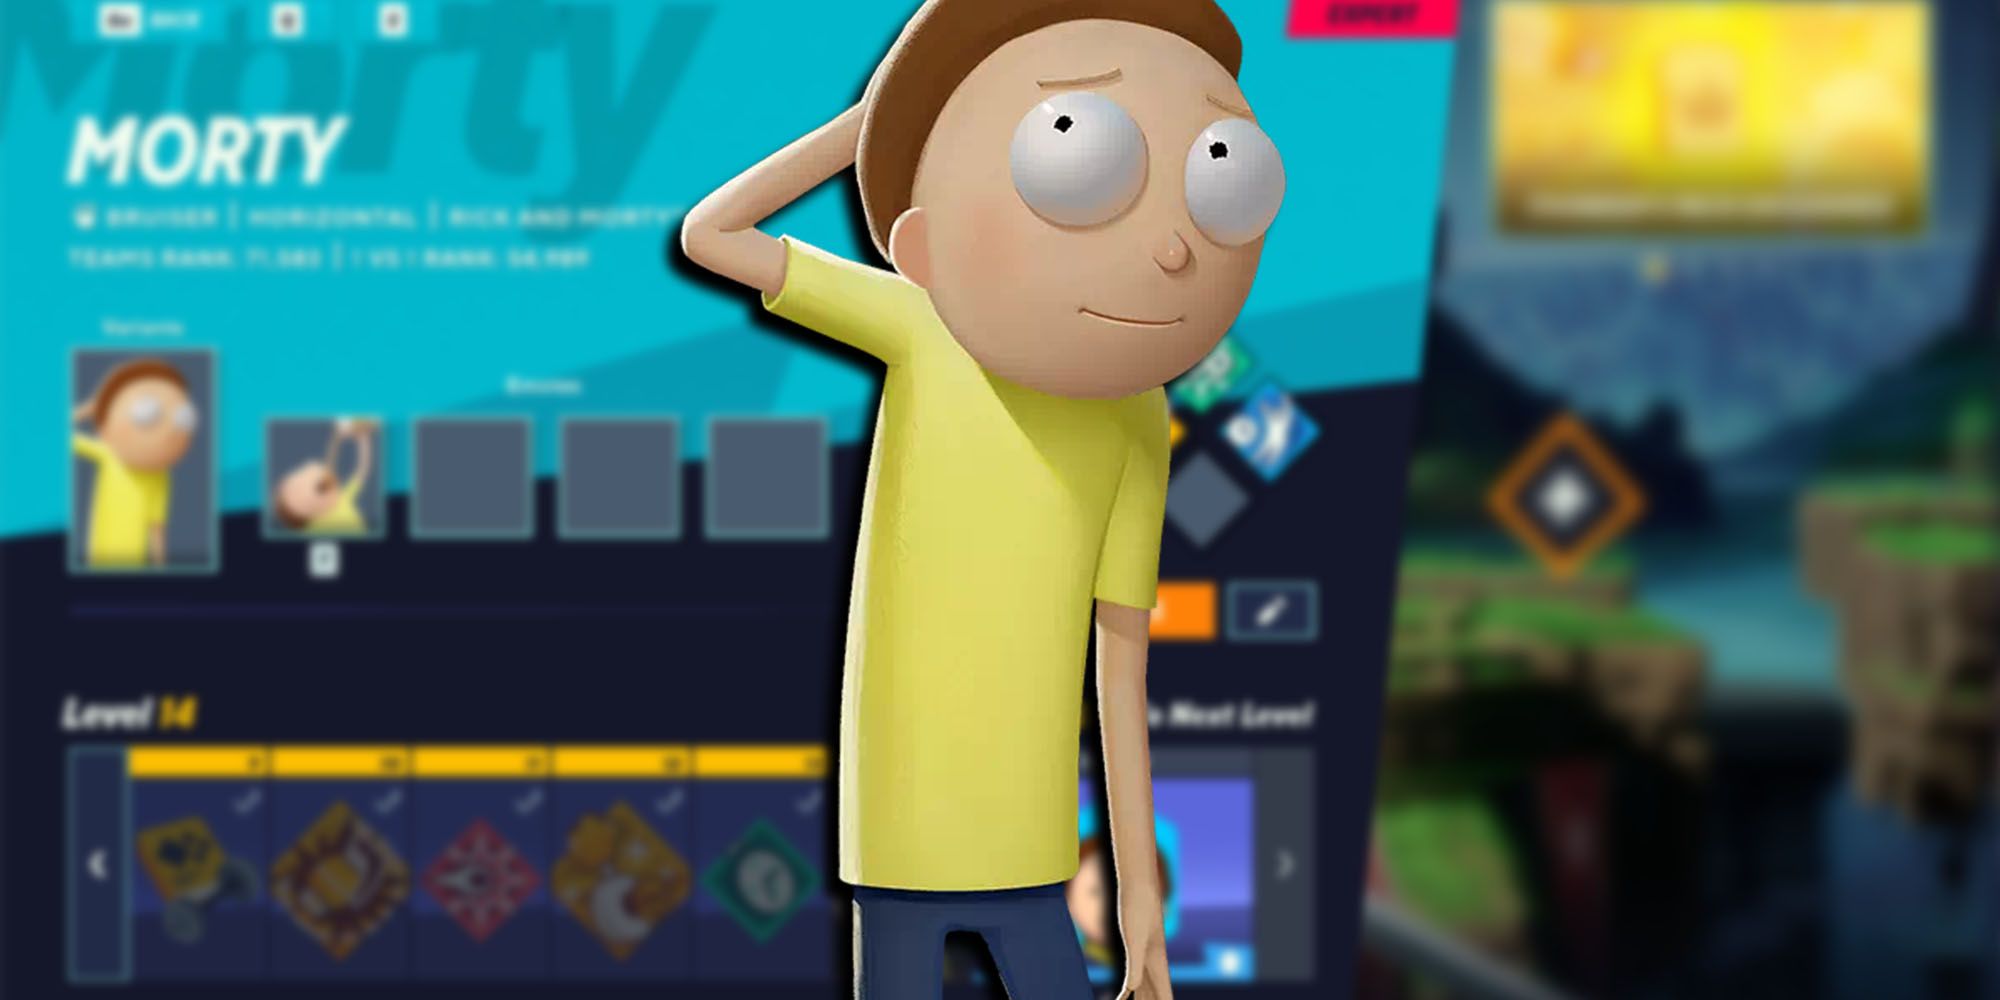 Multiversus - Morty PNG Overlaid On Image Of Morty Options In Collection Menu In-game